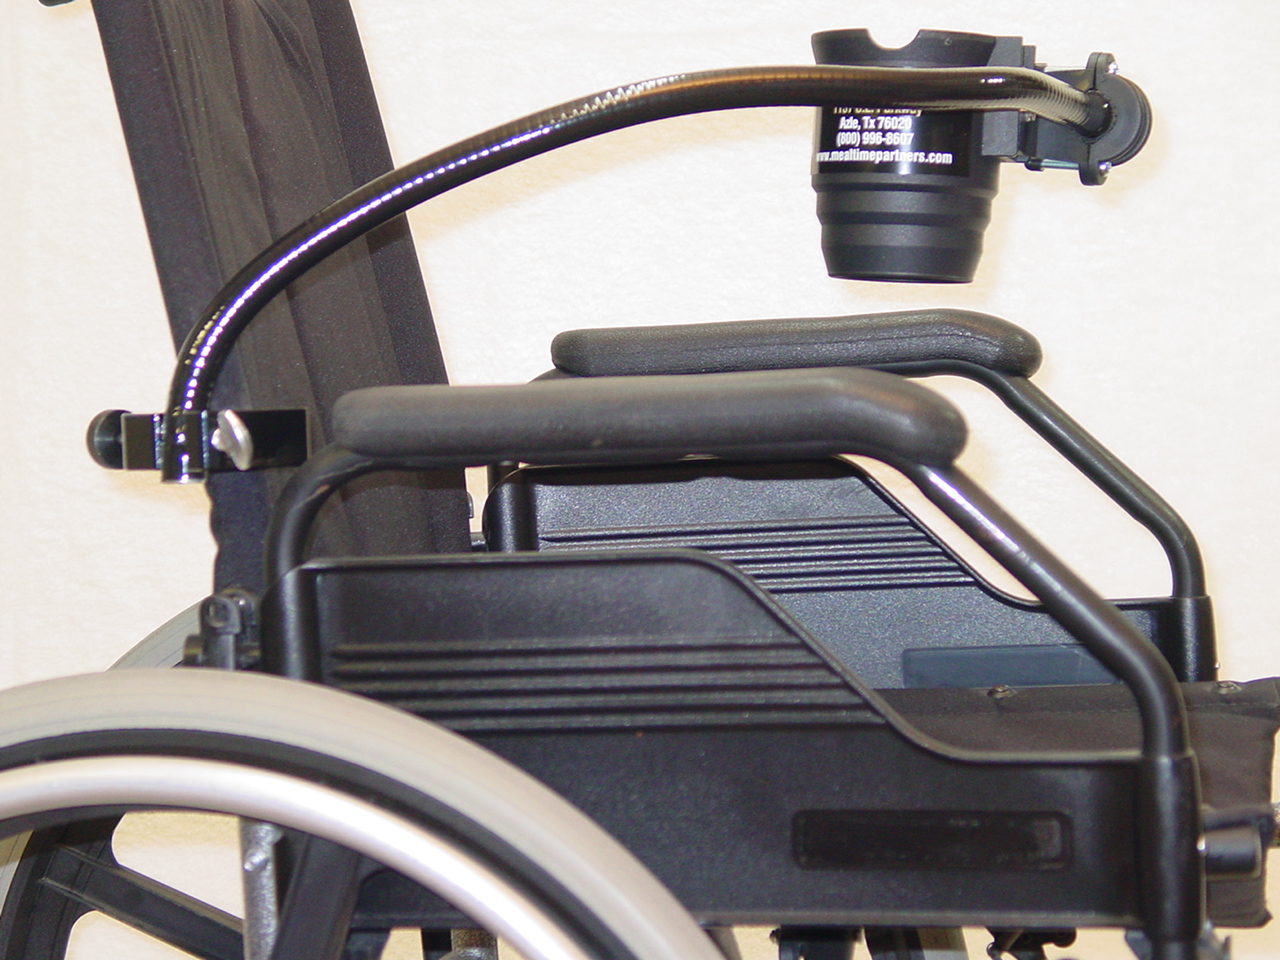 Front Mounted Drinking System on Wheelchair